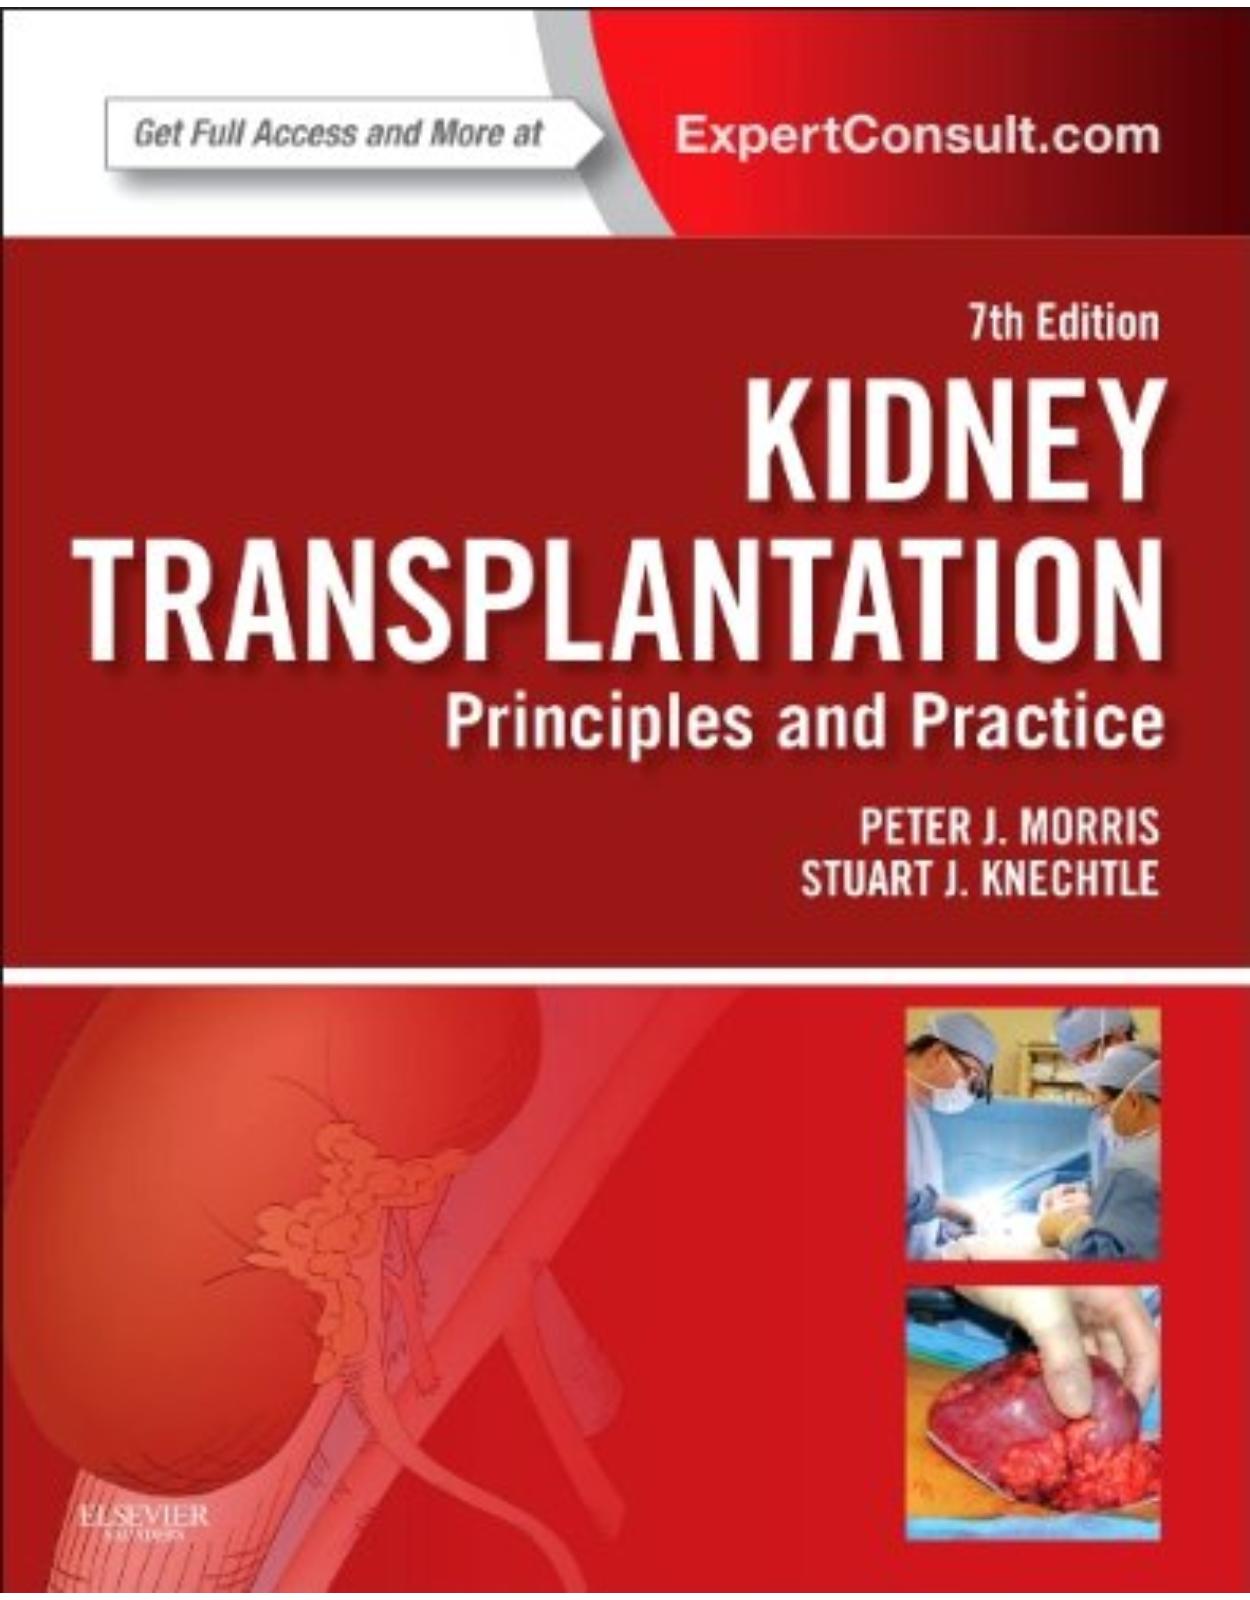 Kidney Transplantation - Principles and Practice, 7th Edition